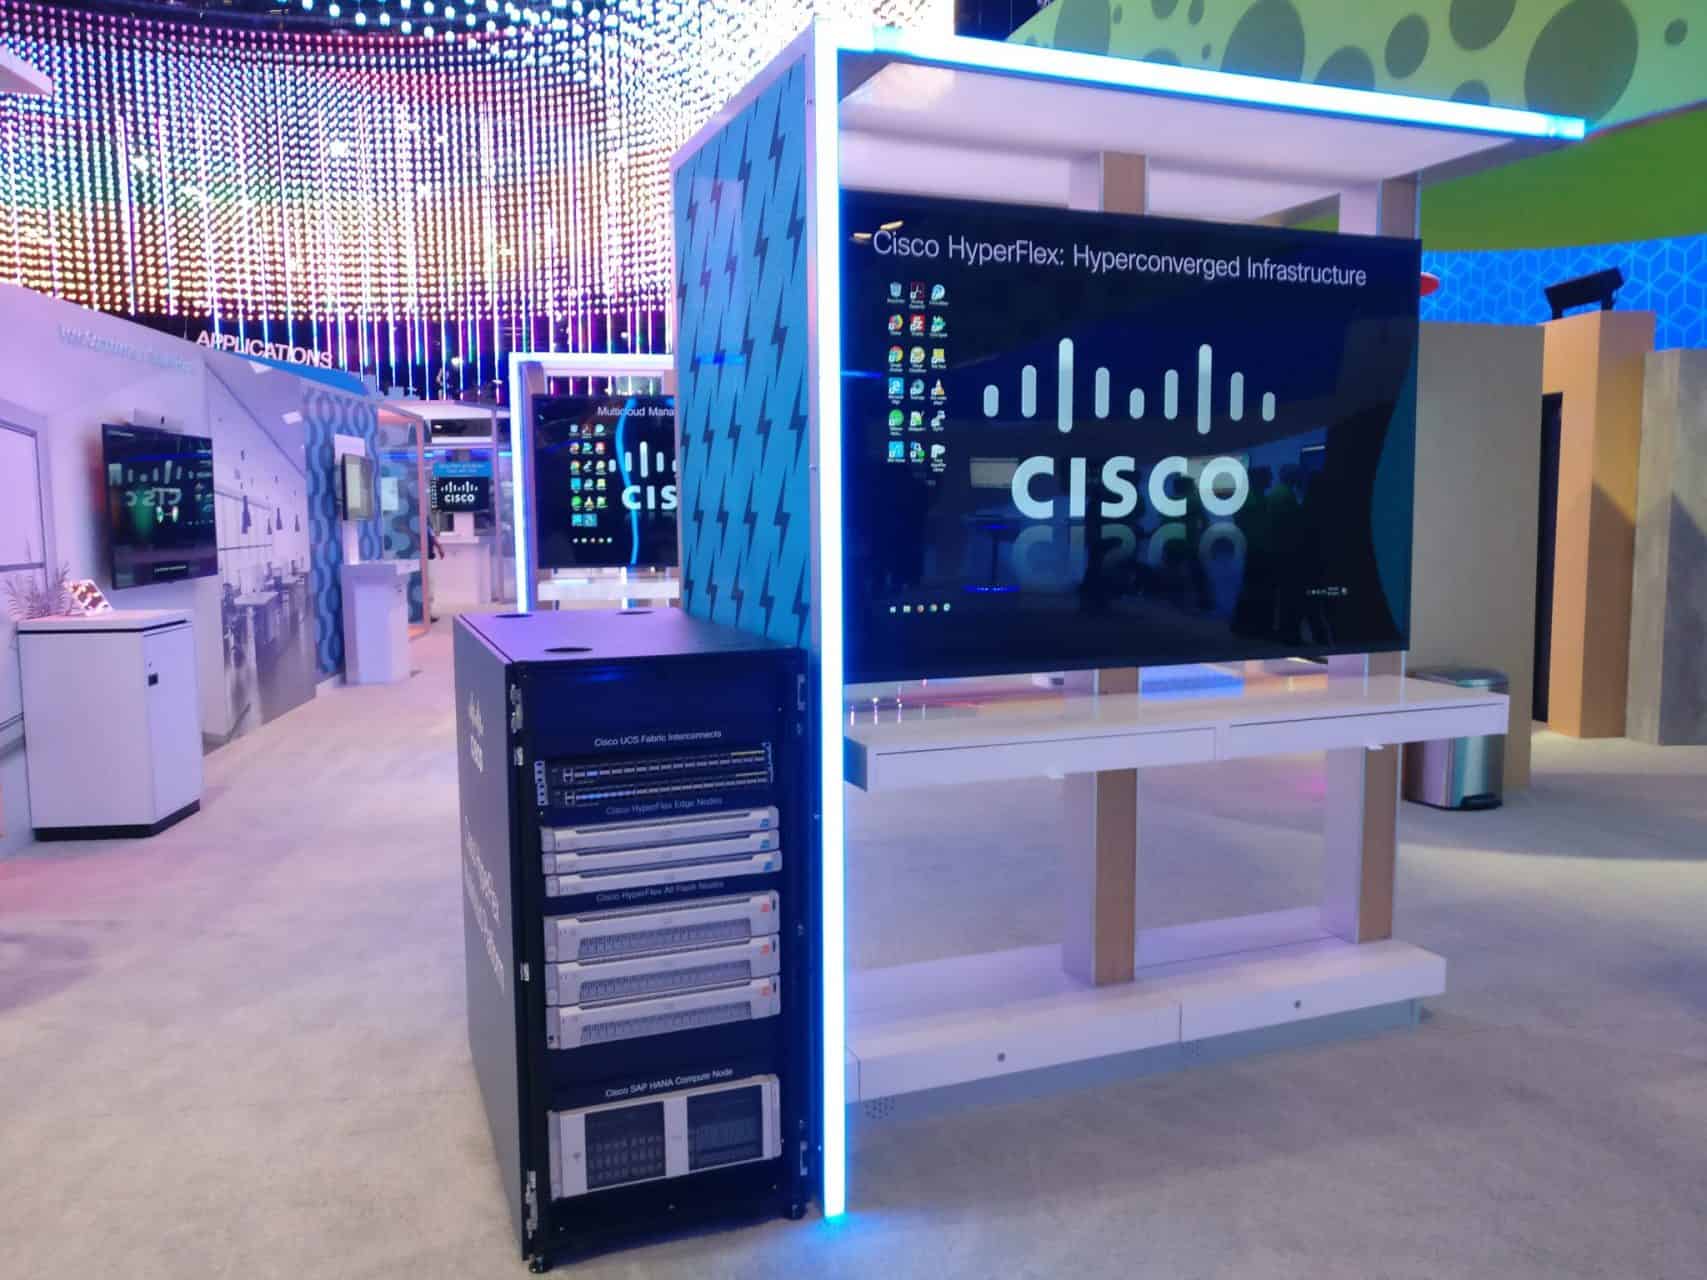 Cisco HyperFlex Booth at WoS